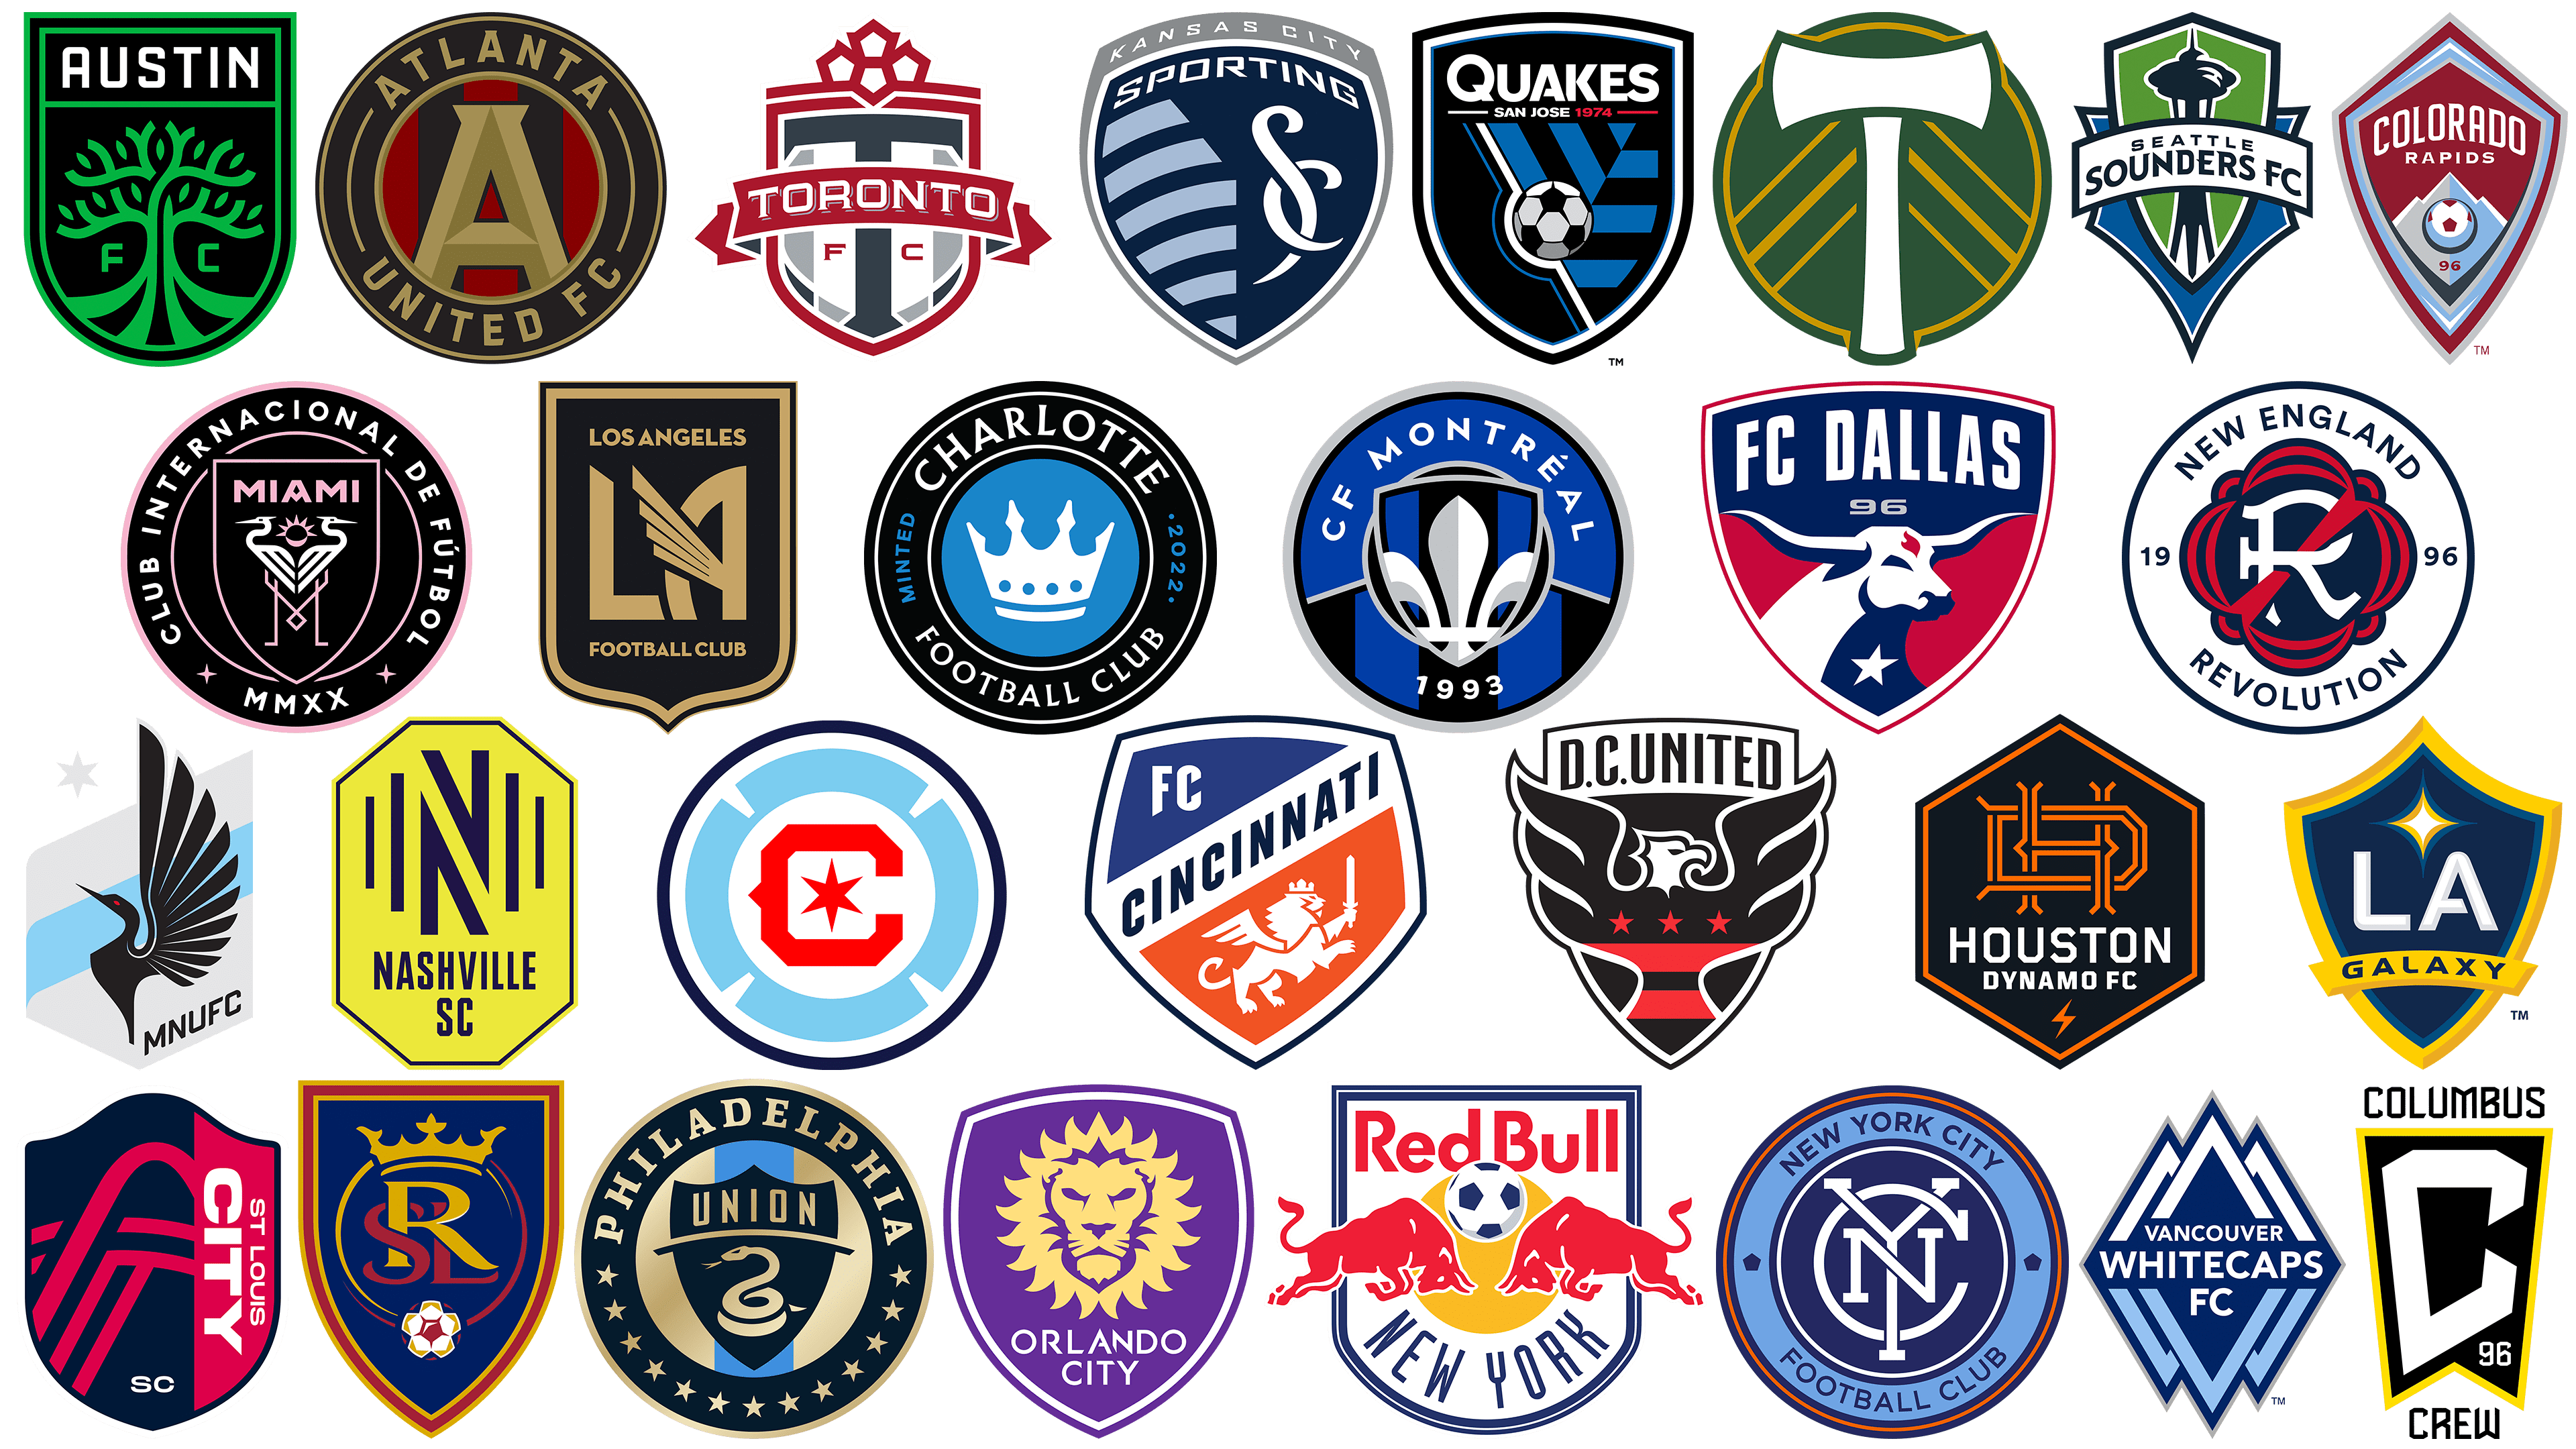 Stories behind soccer clubs crests: Explanations for team logos